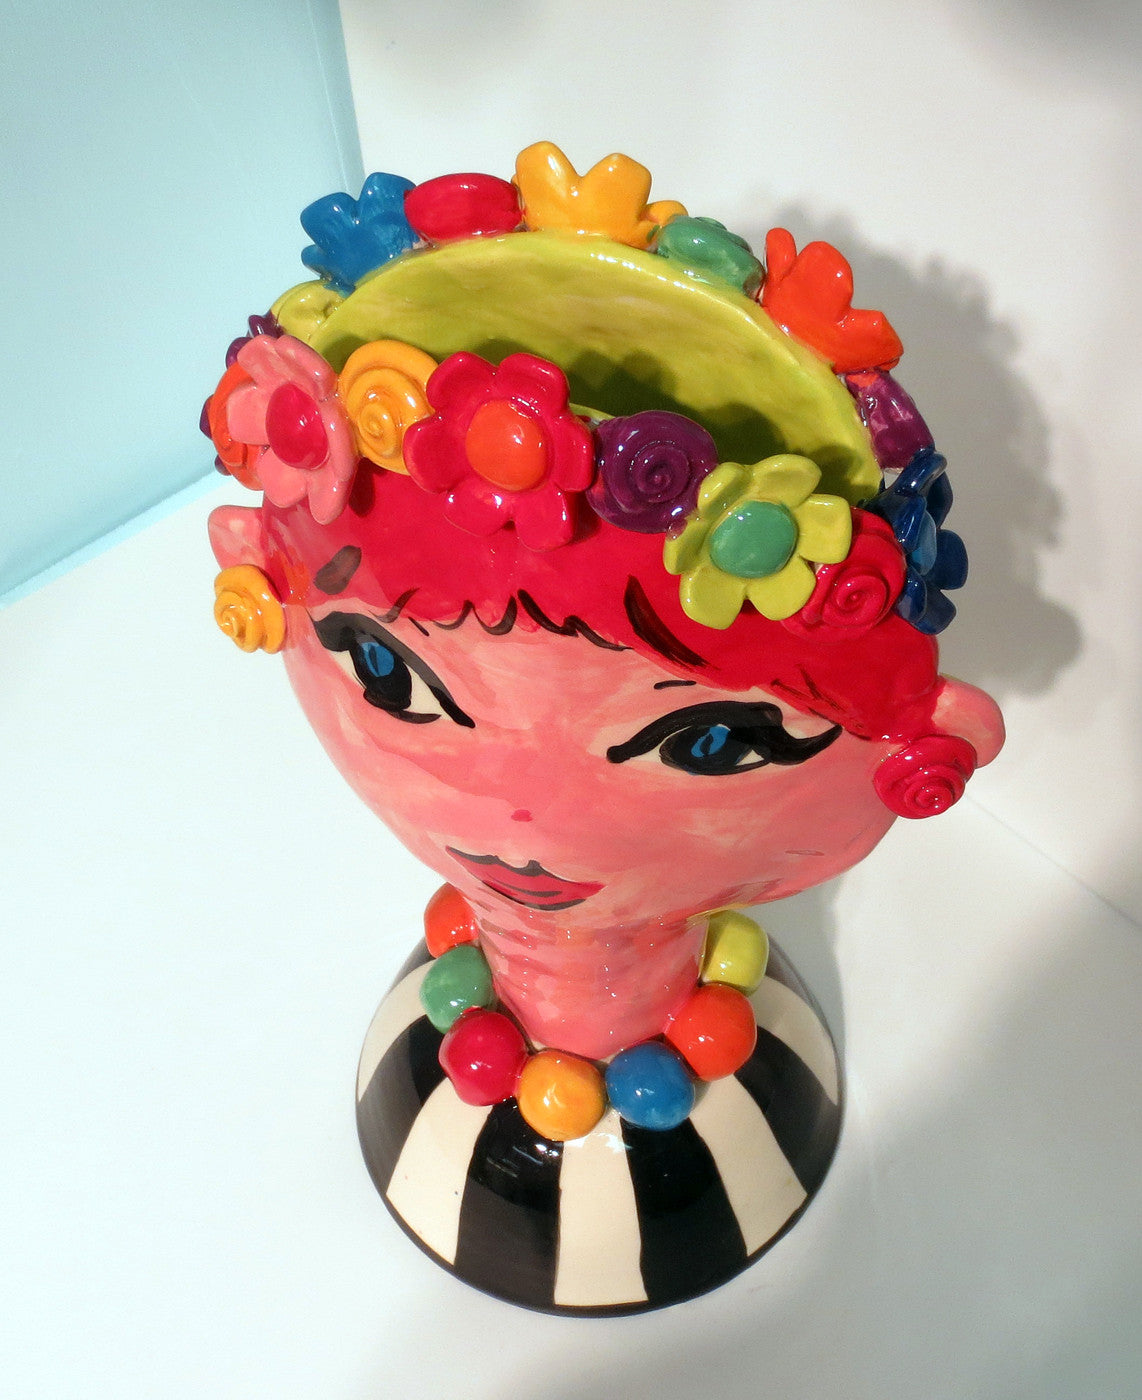 Girl's Head vase with Flowers - MaryRoseYoung